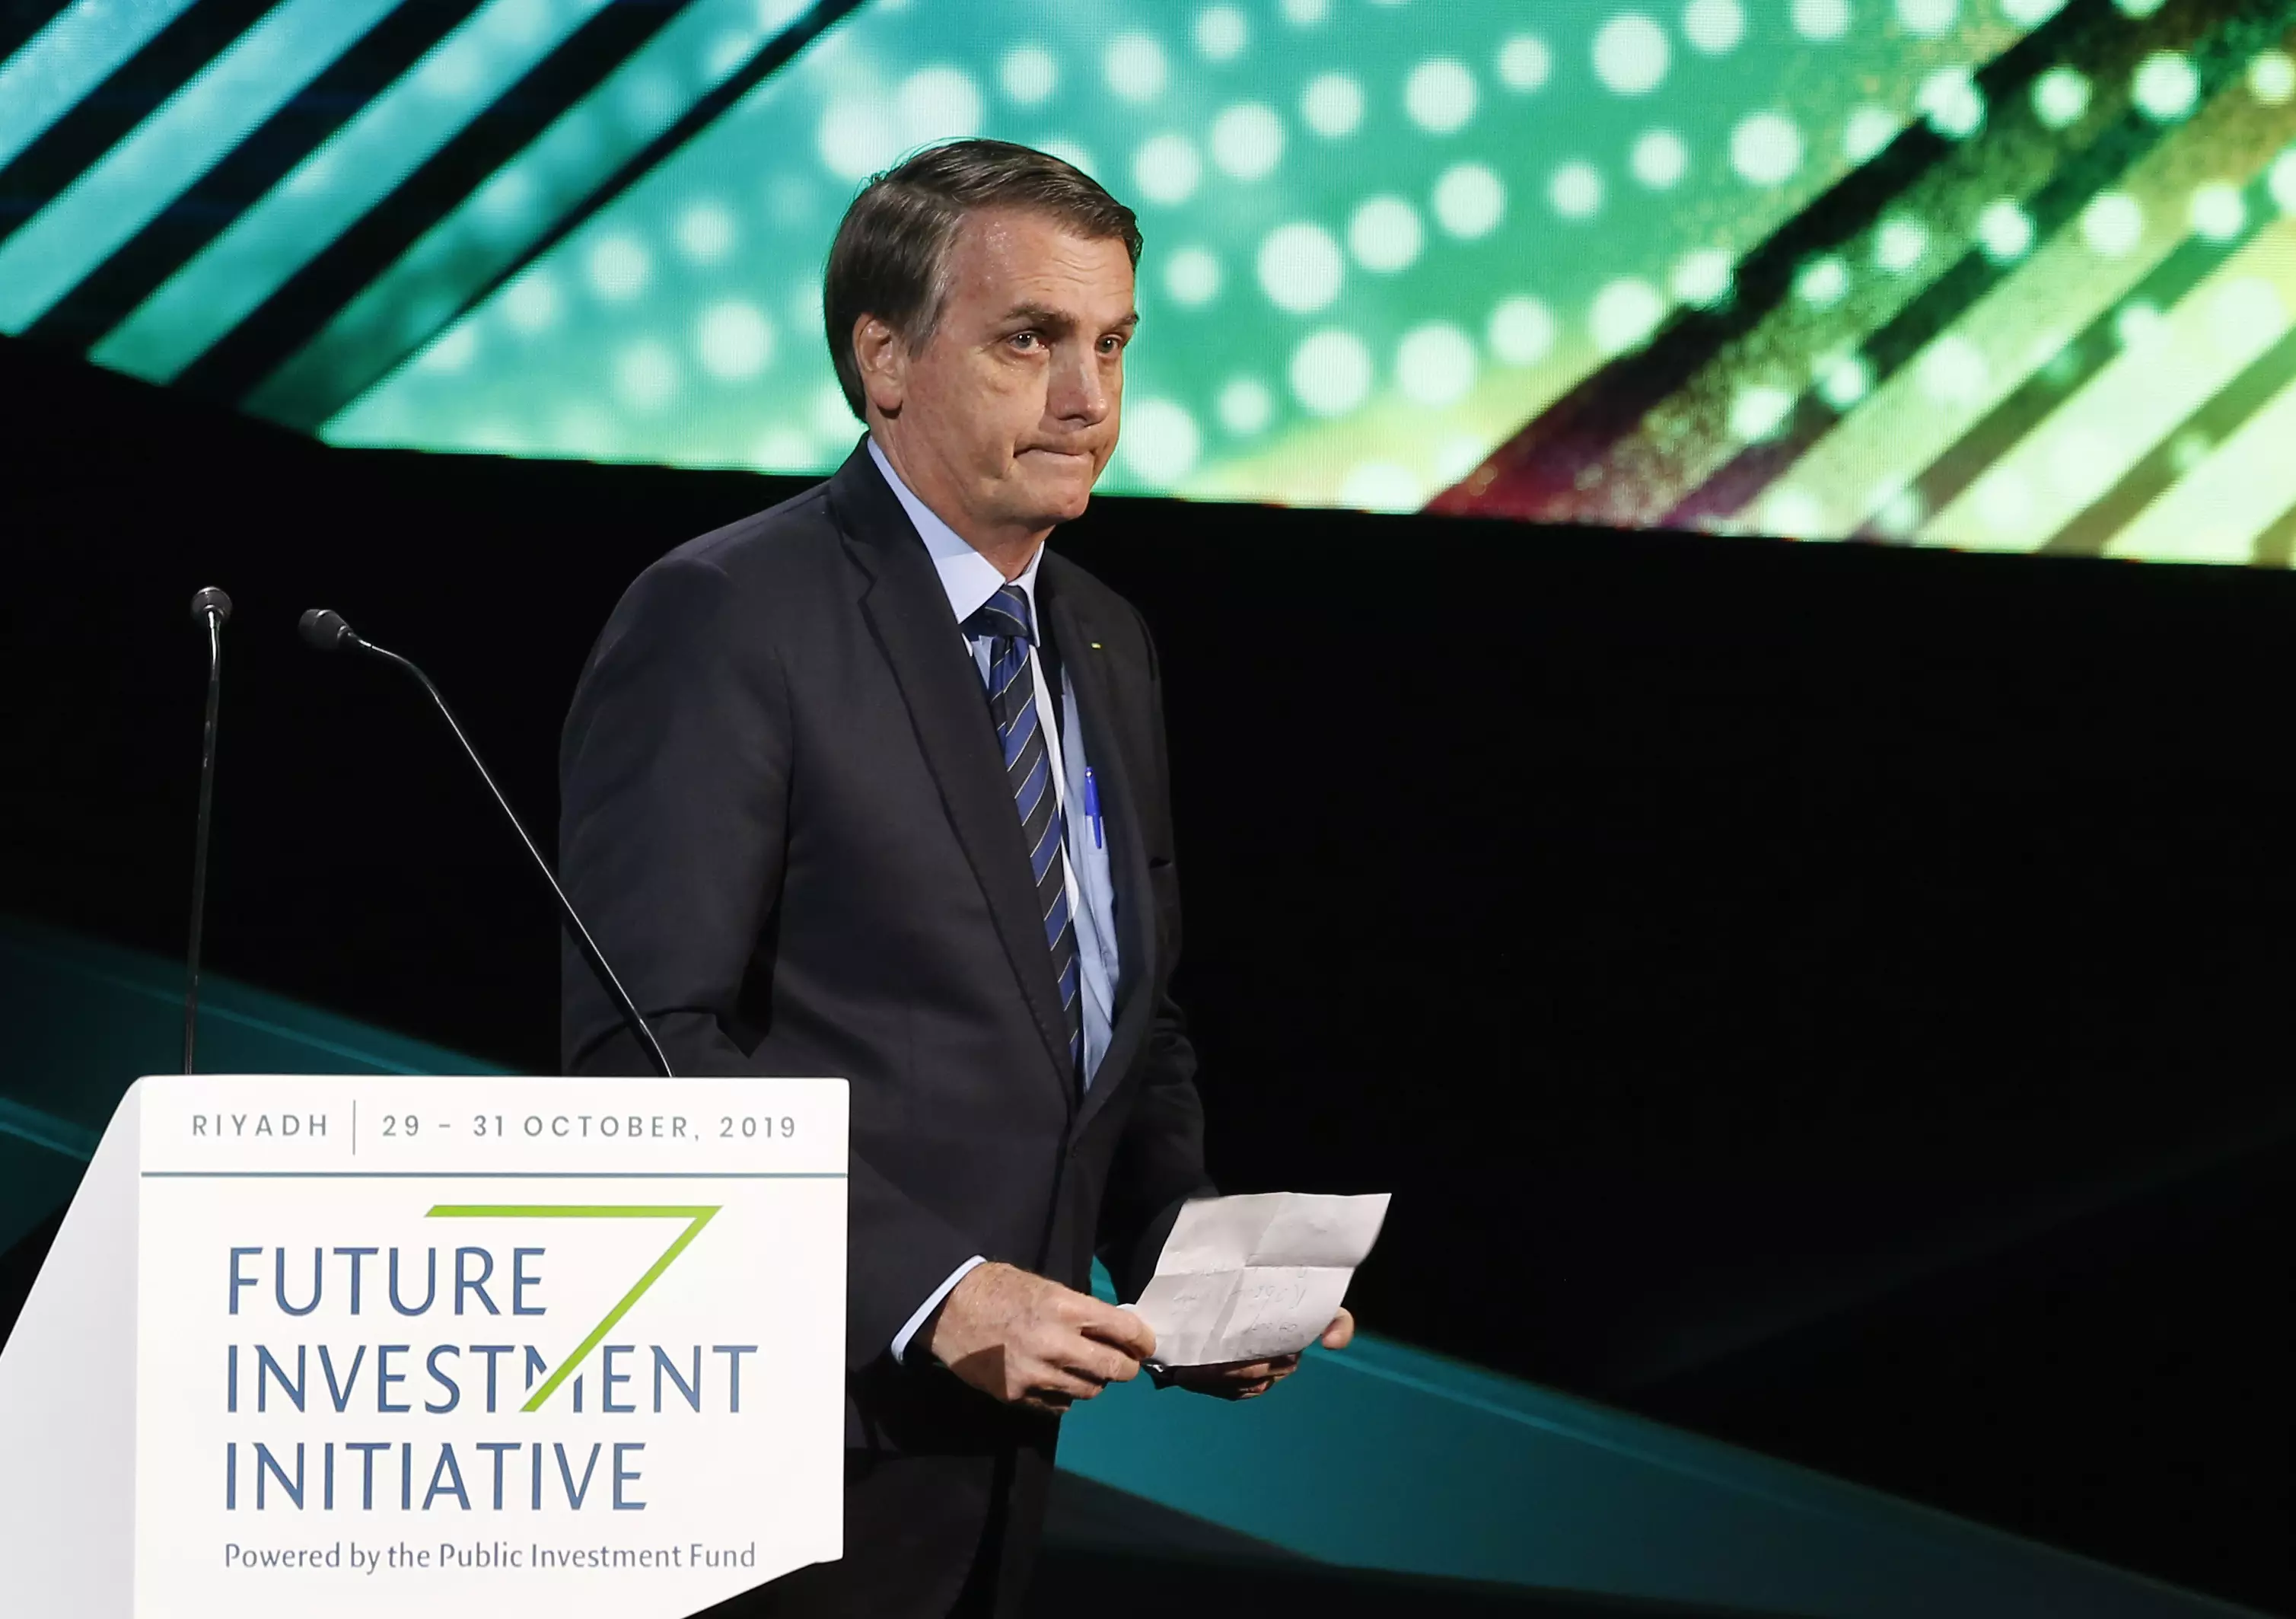 President Bolsonaro has been widely condemned for his stance on climate change and deforestation.